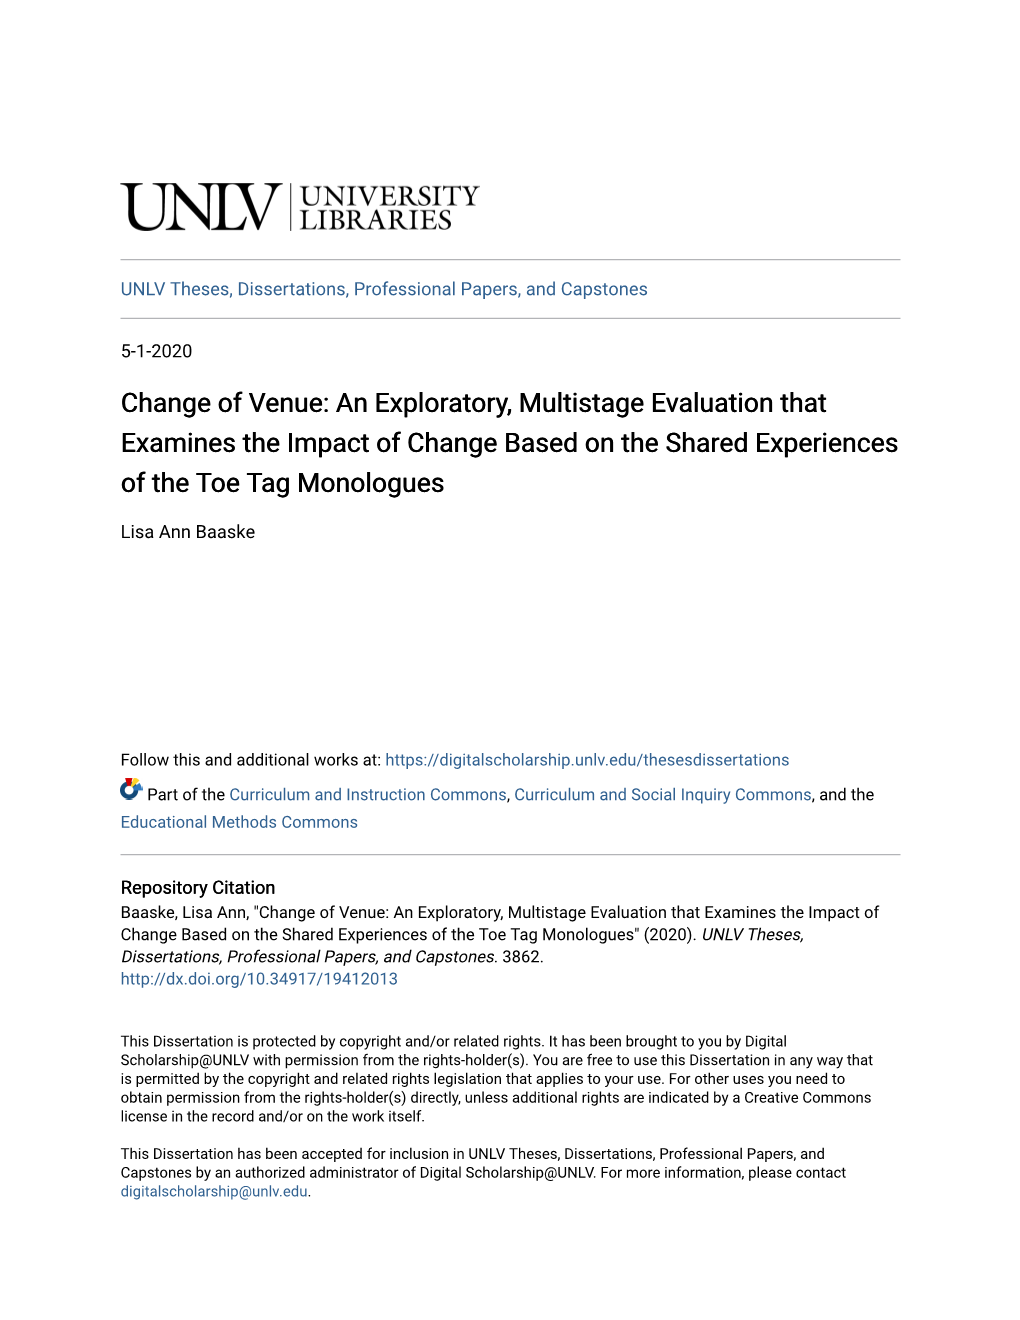 An Exploratory, Multistage Evaluation That Examines the Impact of Change Based on the Shared Experiences of the Toe Tag Monologues